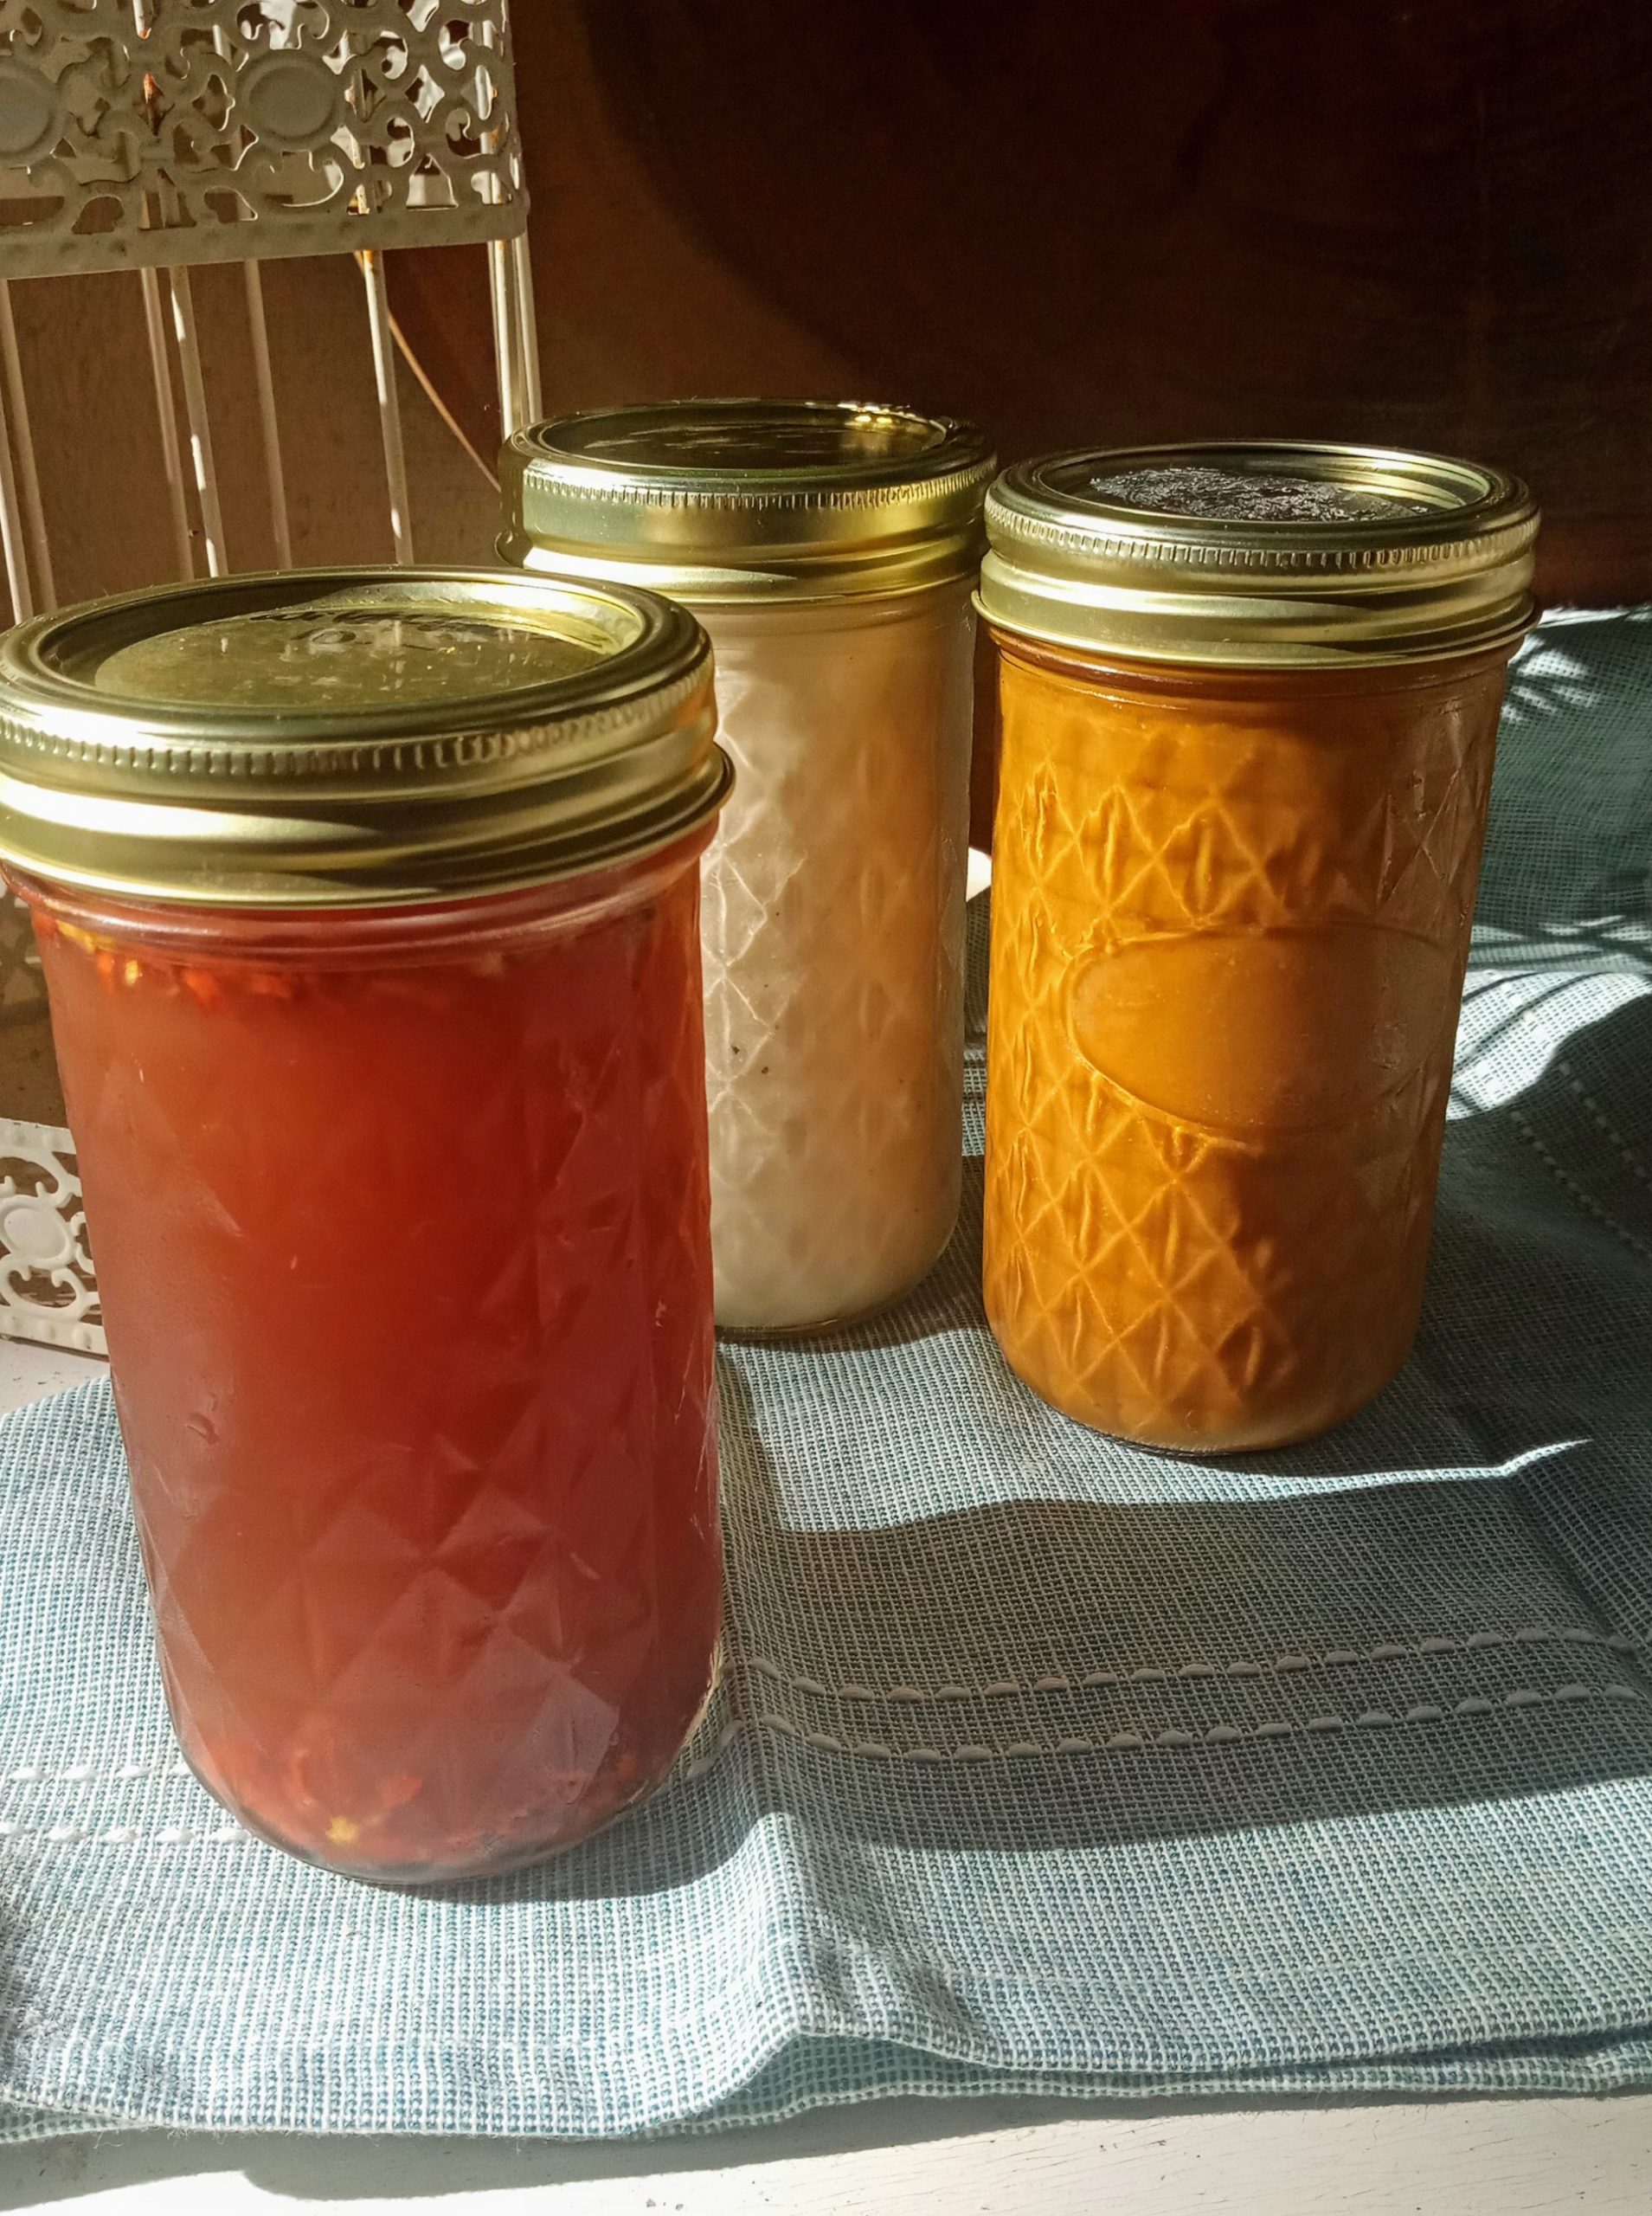 Trio of regional barbecue sauces can spice up your grilling